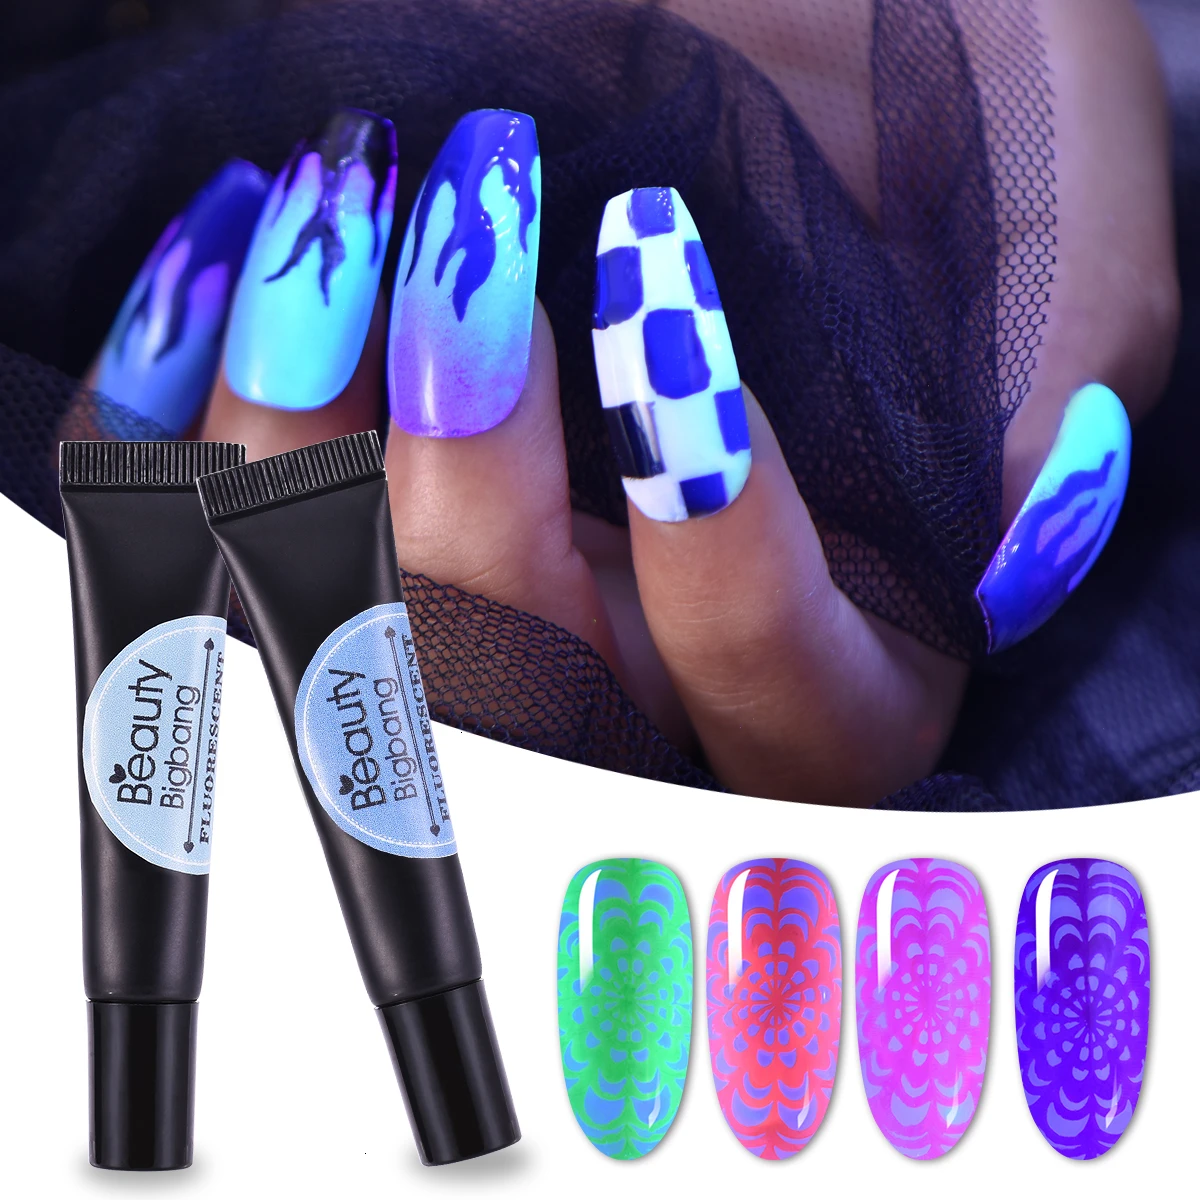 Beautybigbang 8ml Neon Stamping Gel Fluorescent Soak Off Colorful Varnish Glow In The Dark UV Light Nail Art Poly Gel for Plates